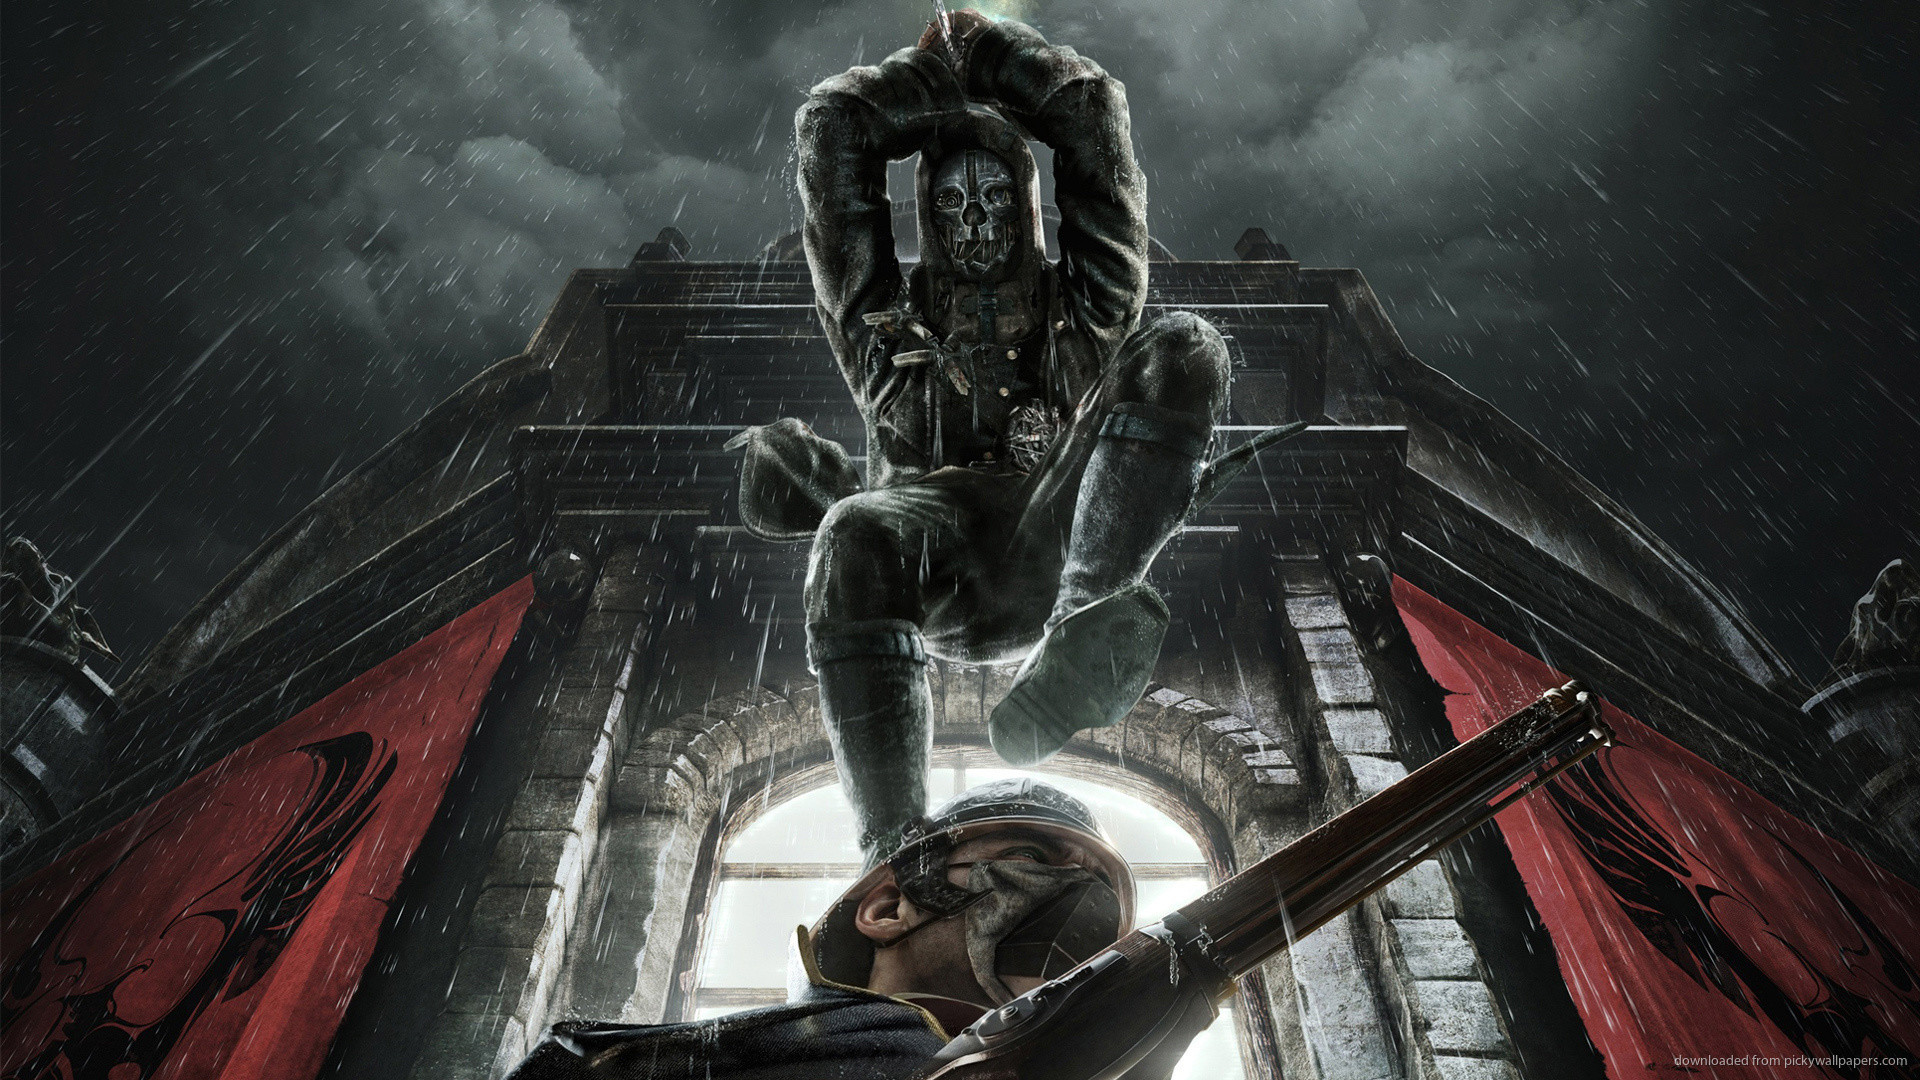 1920x1080 Dishonored Game High Definition Wallpaper picture